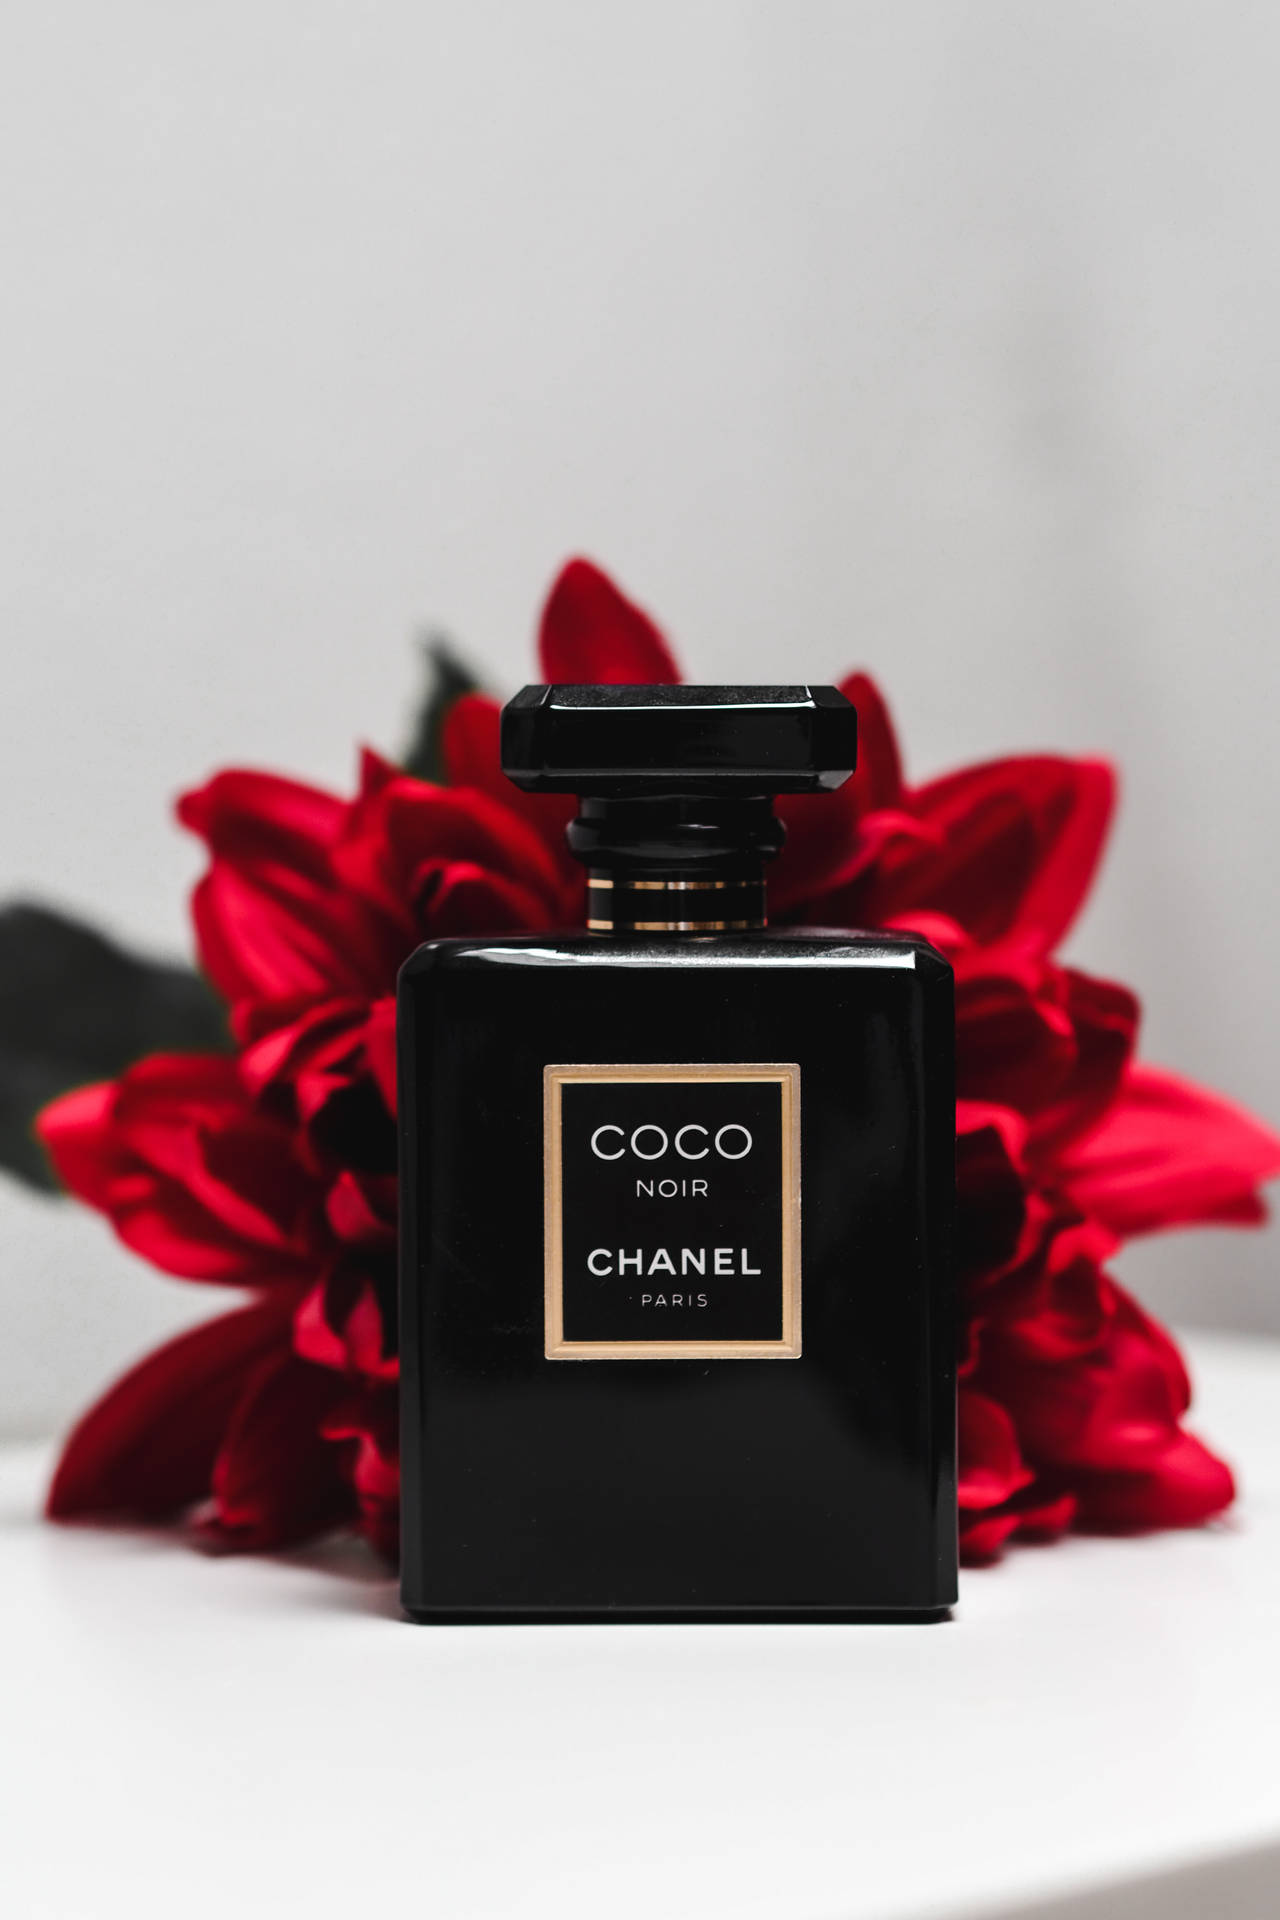 Chanel 3072X4608 Wallpaper and Background Image